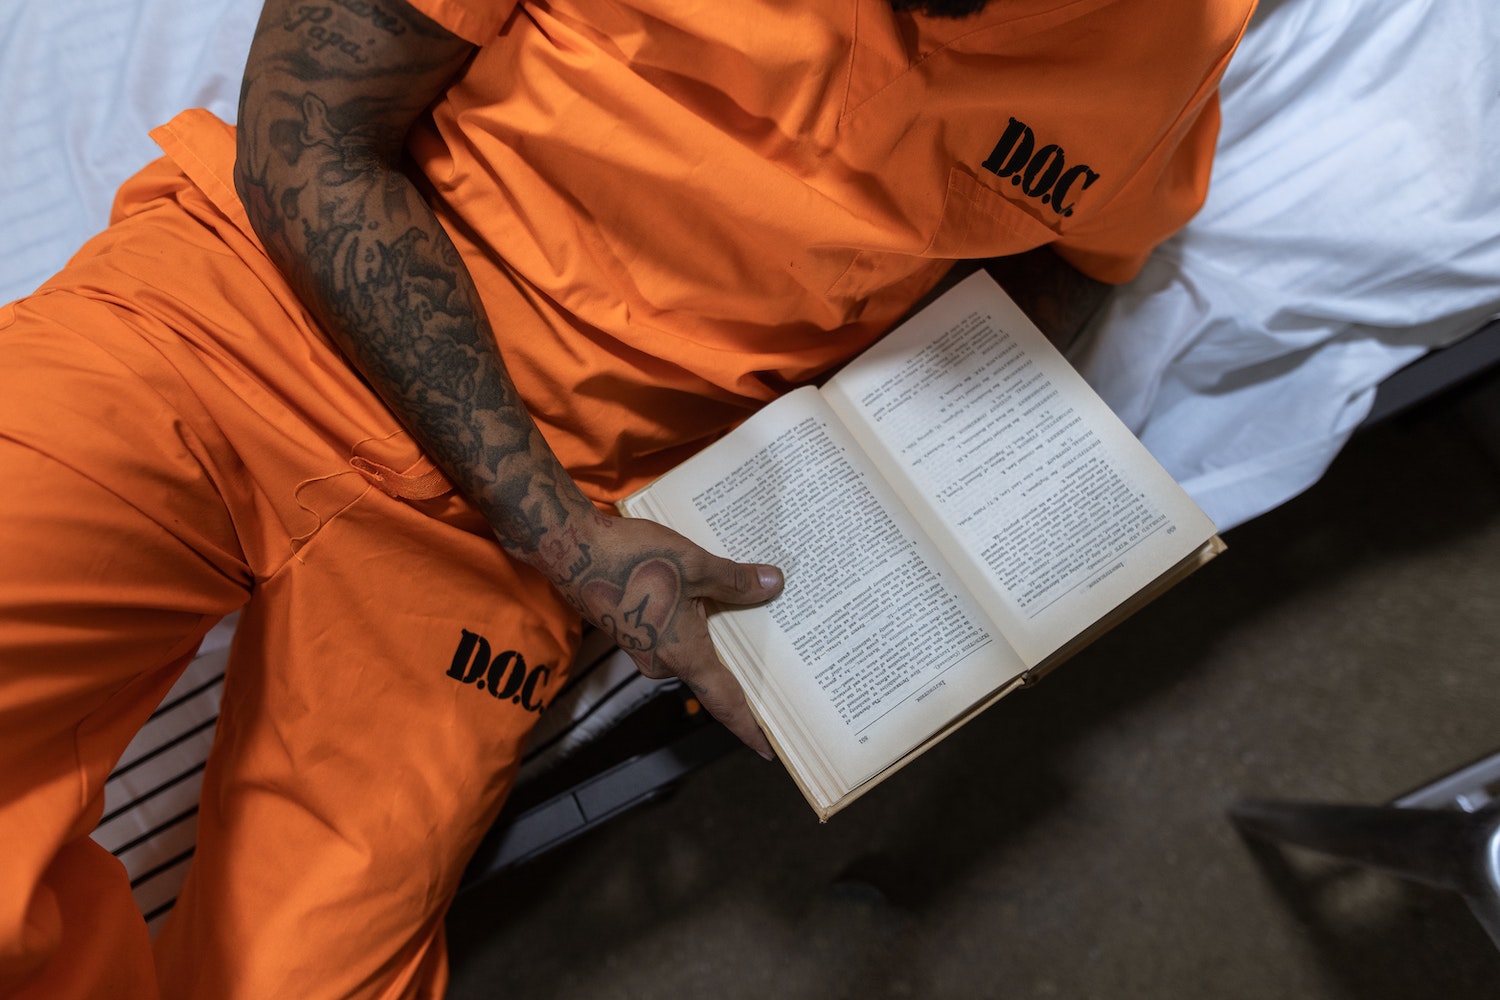 Former Prisoners share Real Stories - prison reading - Papa D.O.C Rel Te Oe Laki2 Sistet ... M d 433 and t ning A3 wyma by the Tor doty meget sm 20 Ath M 11 The s Lung www. A 1 Tok E oba . M 41 D.O.C. Noot KILKing fre R Mga 1727eponat Sines 2. 2030? 121 P